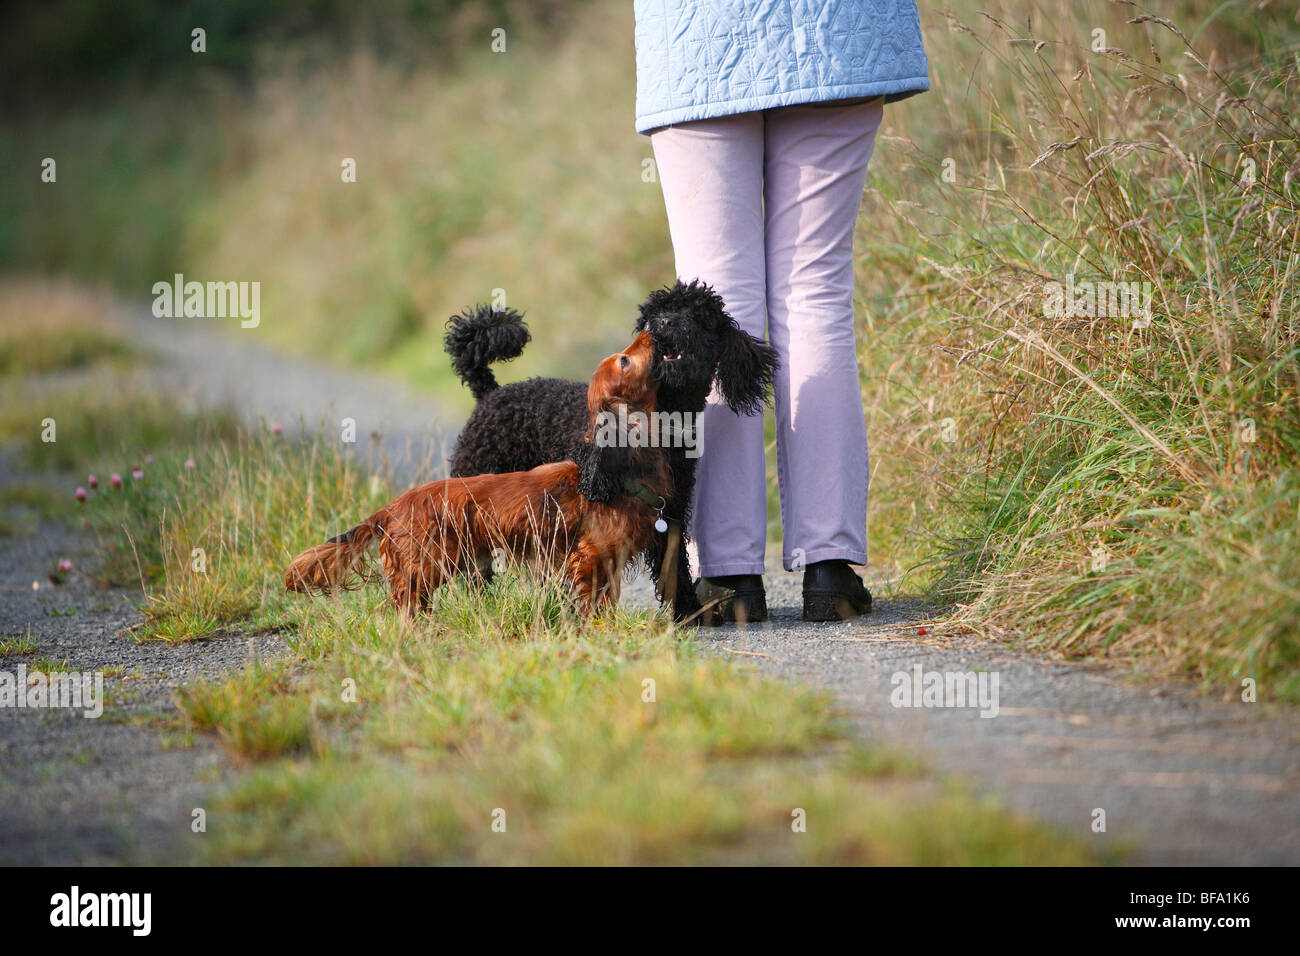 Miniature Poodle (Canis lupus f. familiaris), black male dog rumping with a male Wire-haired sausage dog, Germany Stock Photo